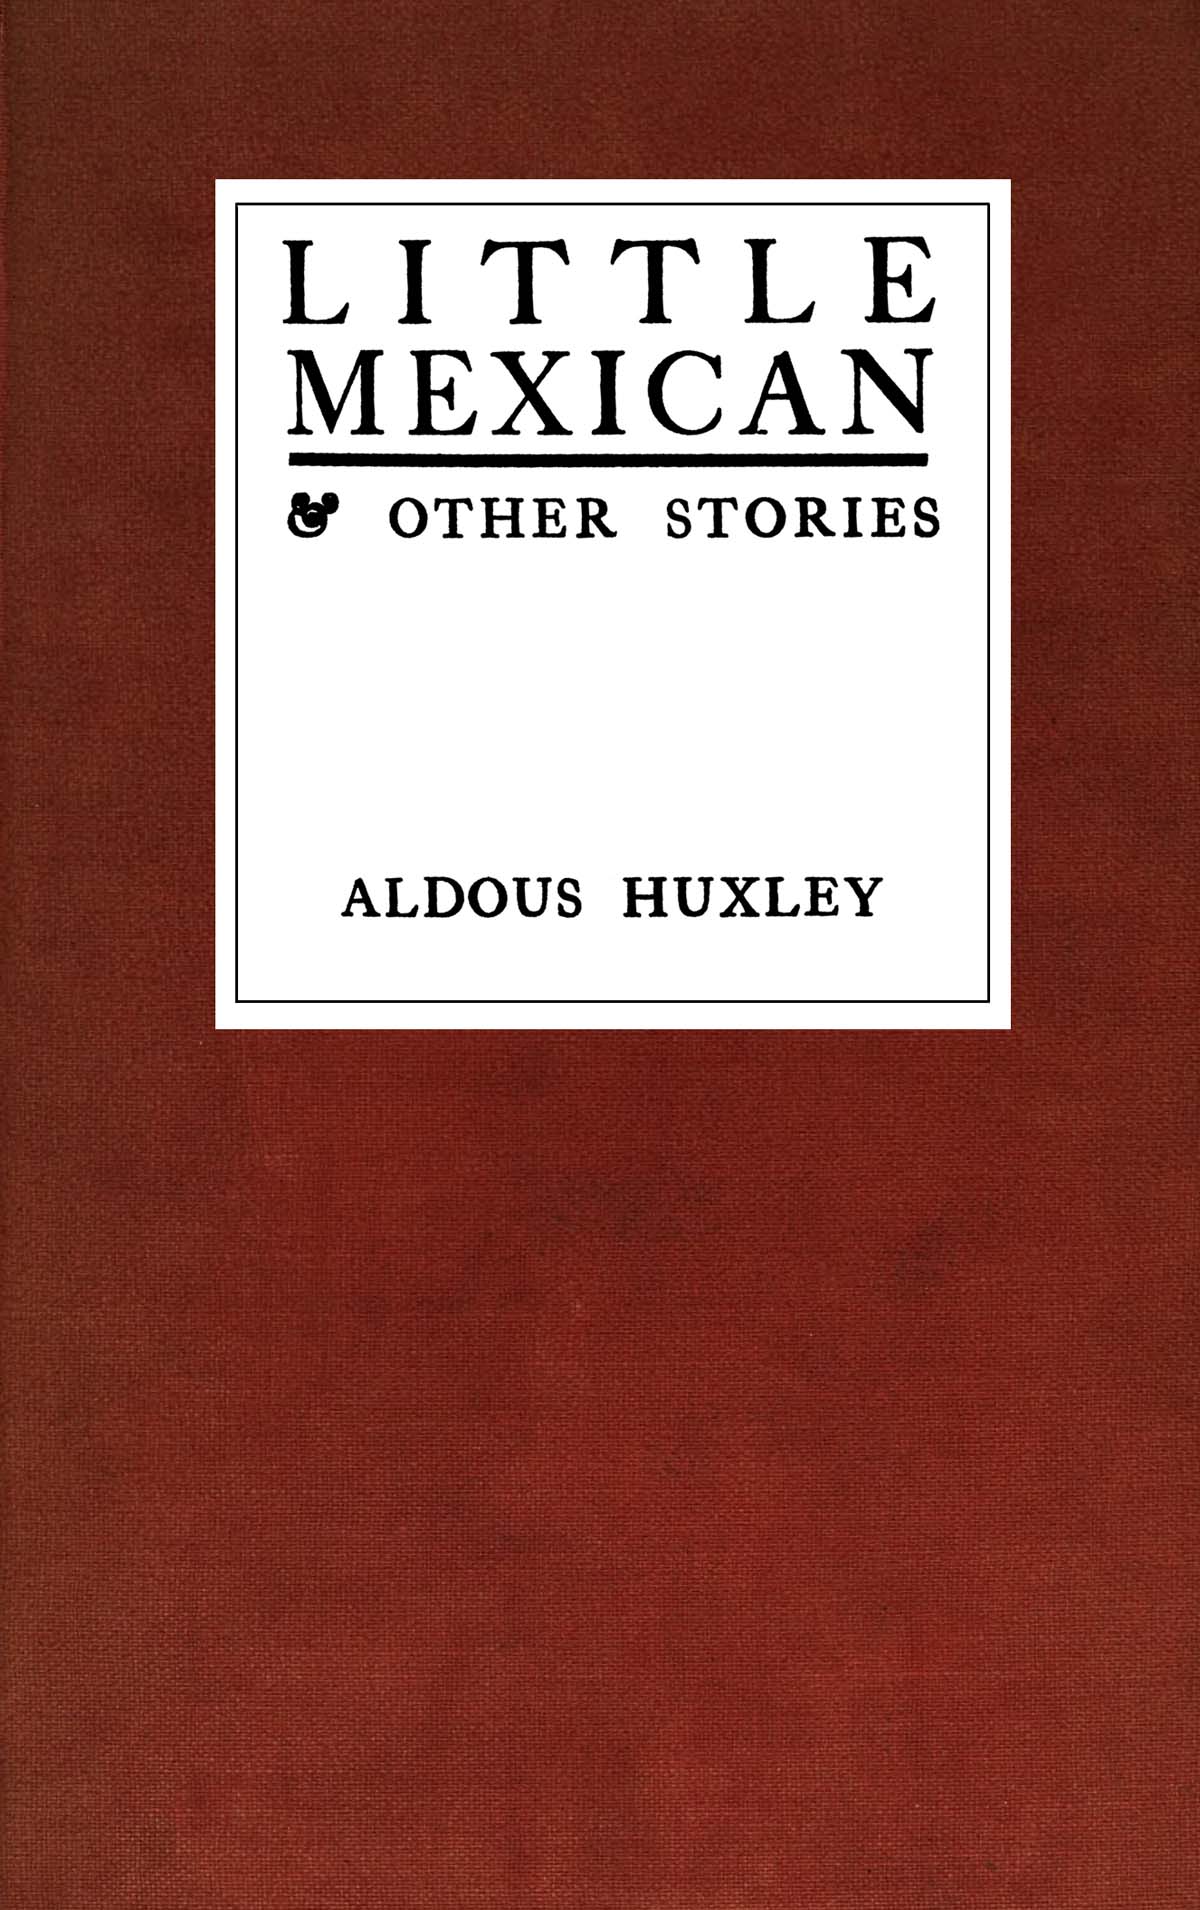 Little Mexican & Other Stories